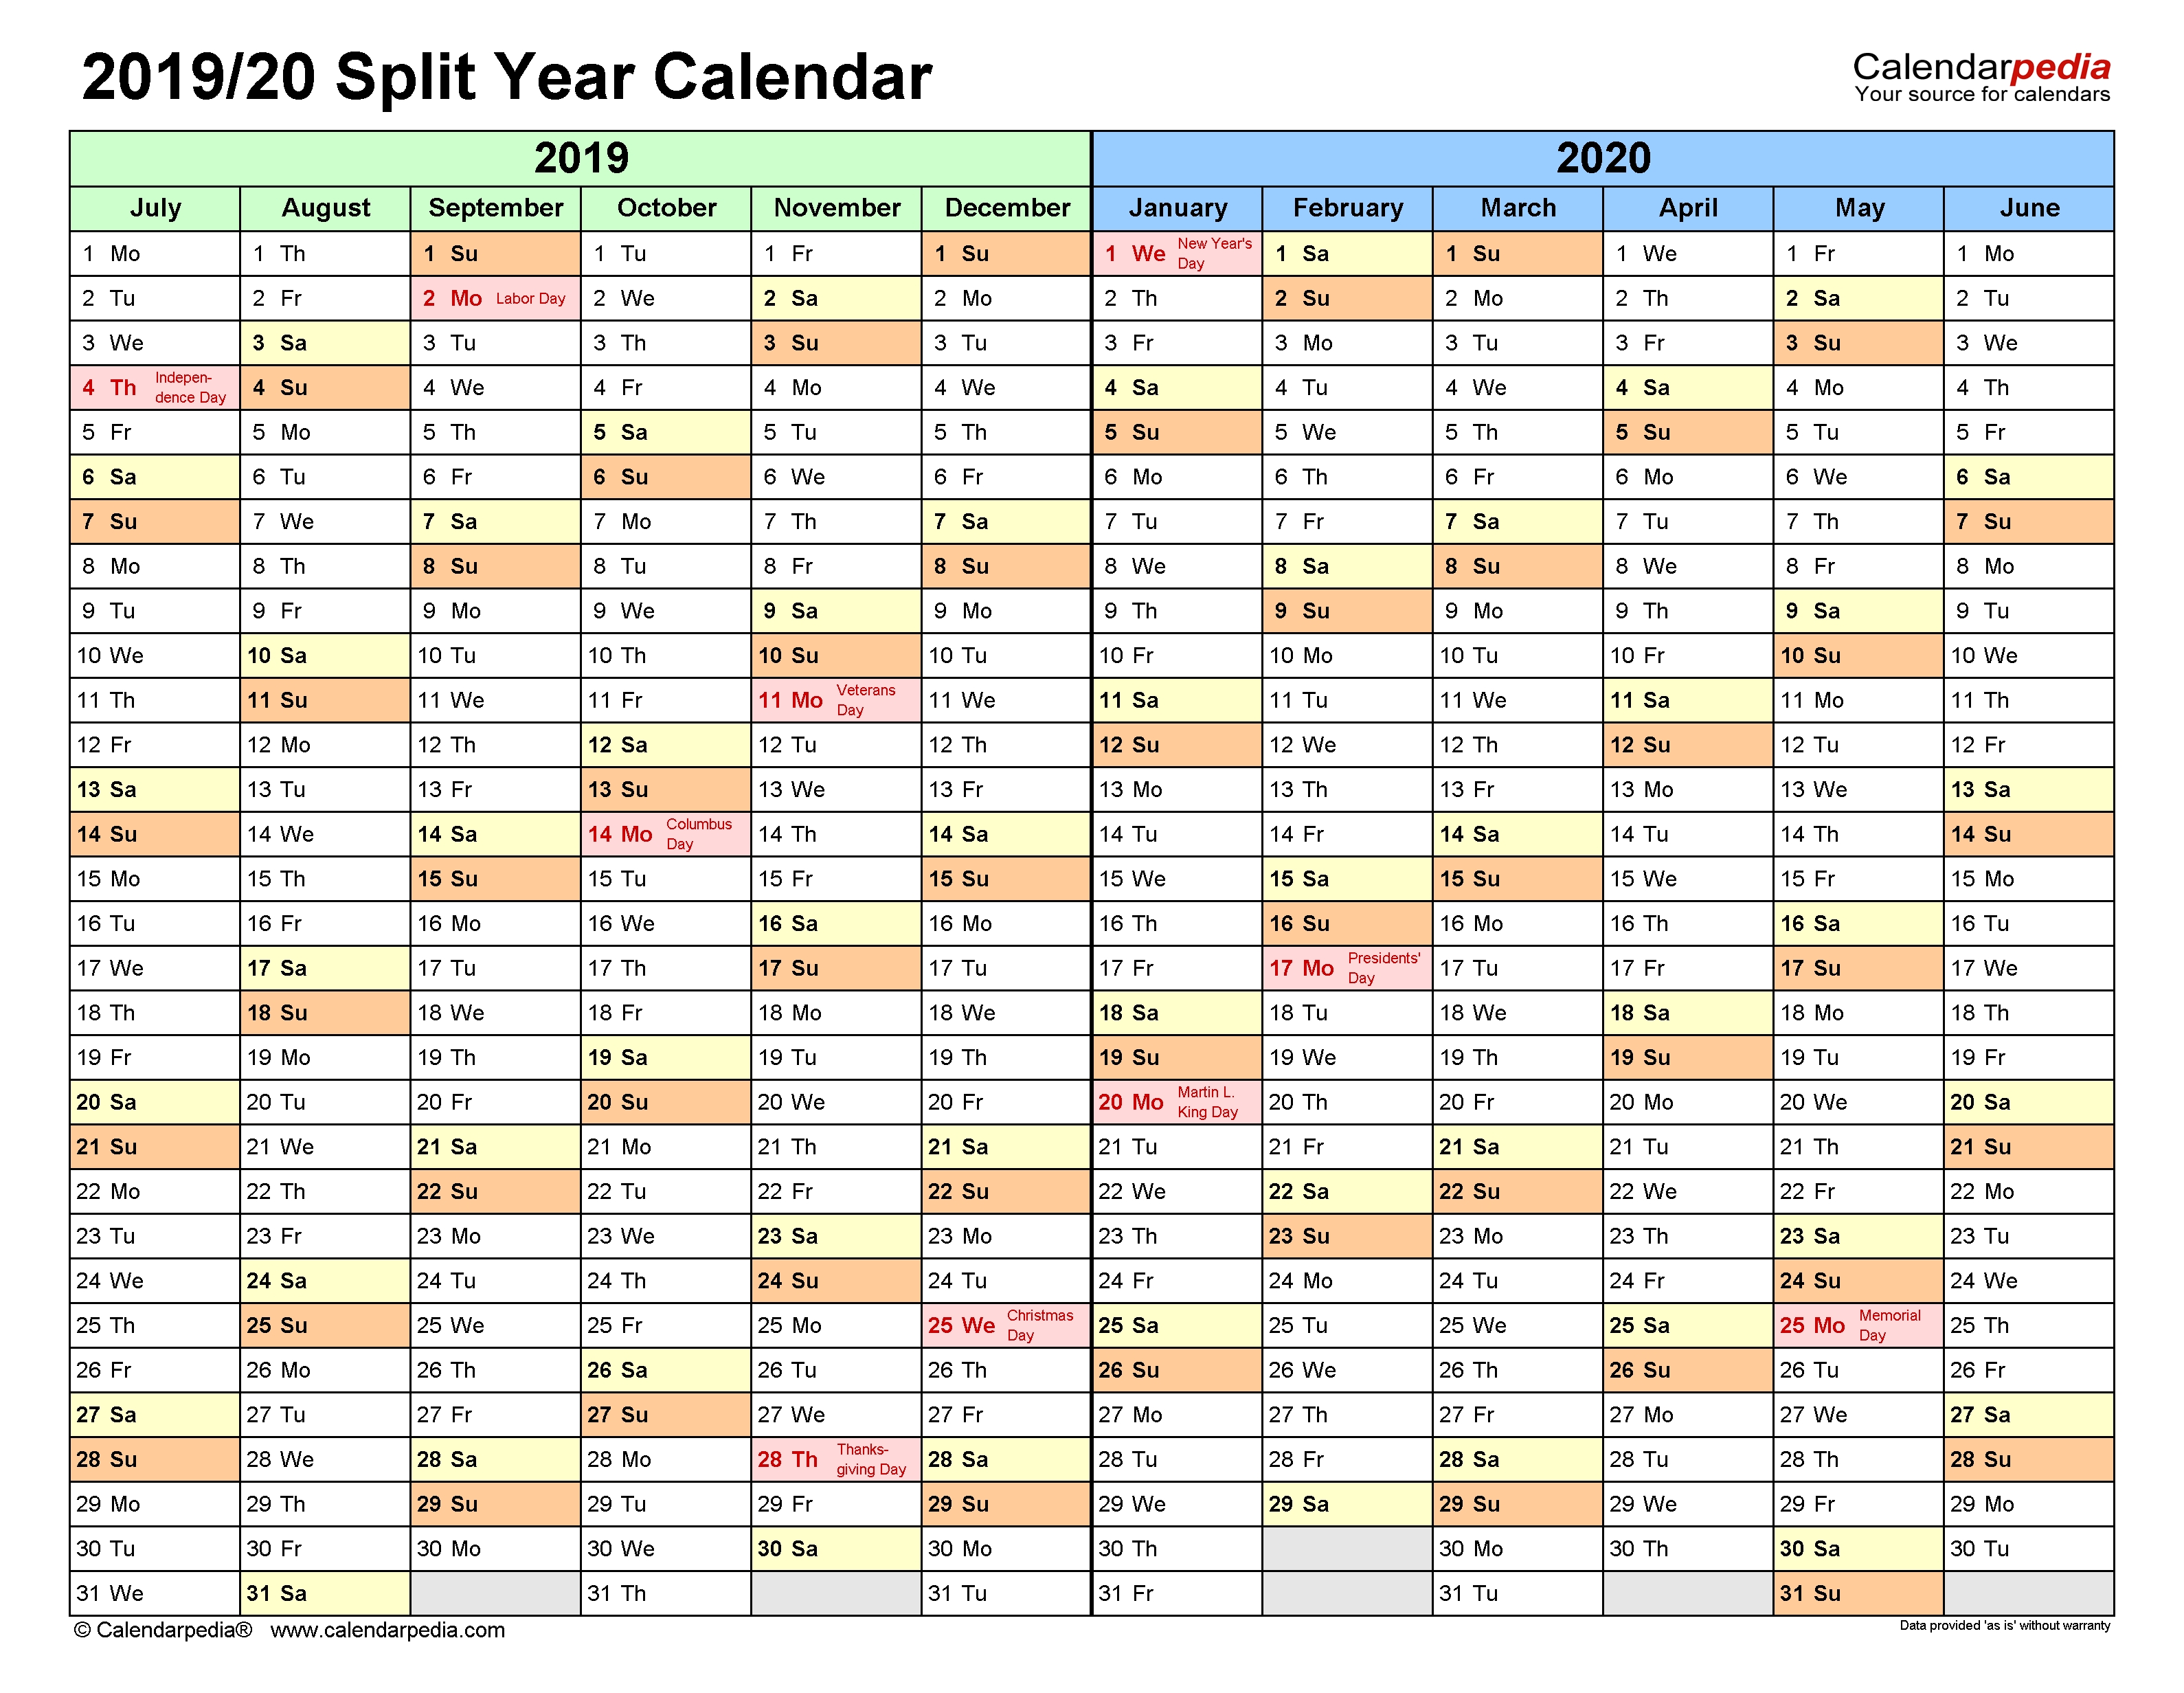 Split Year Calendars 2019/2020 (July To June) - Pdf Templates with Financial Year Calendar 2019 2020